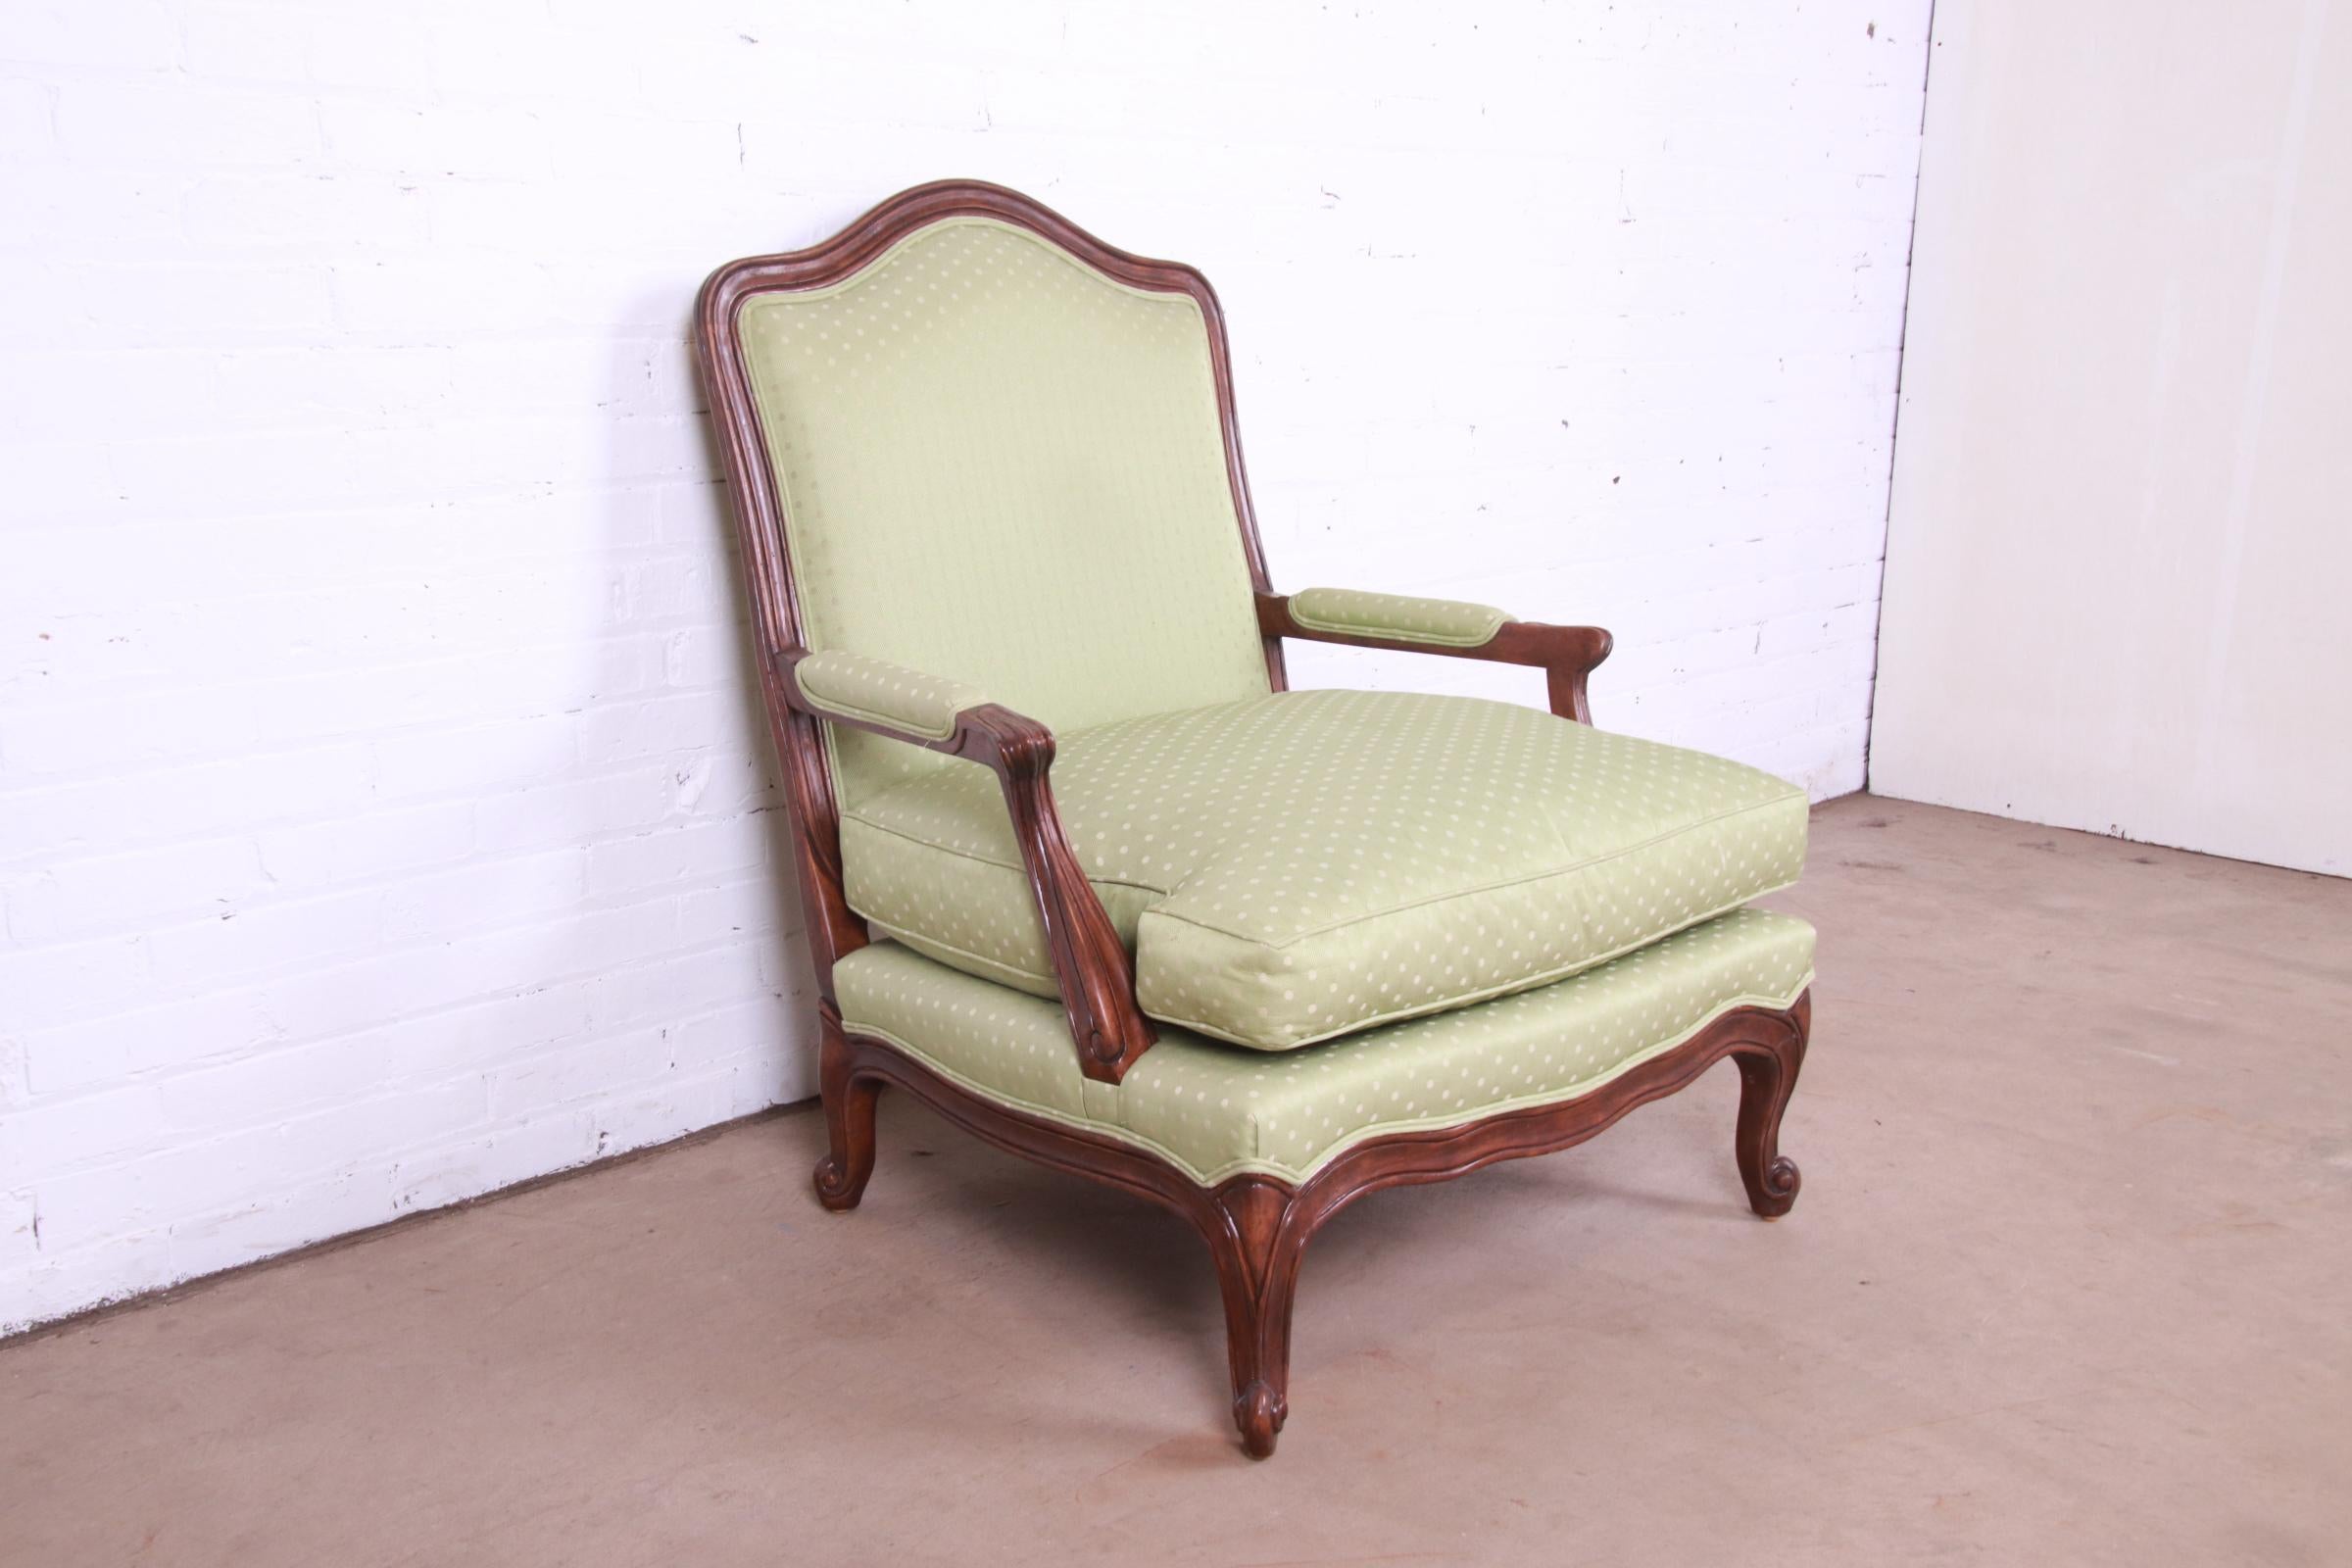 Minton-Spidell French Provincial Carved Walnut Upholstered Fauteuil with Ottoman For Sale 6